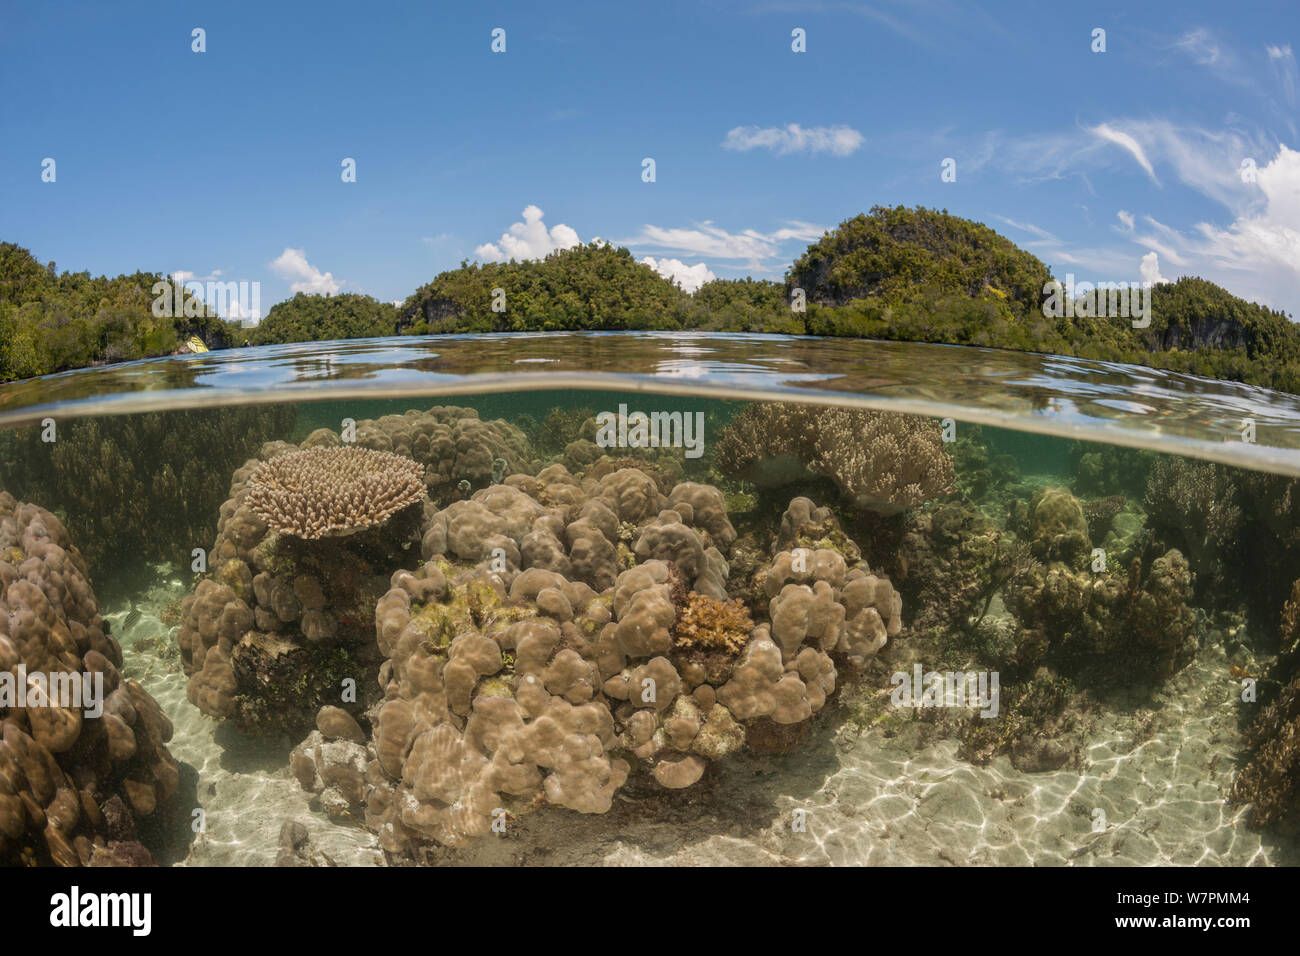 Coral reef split level with mangroves. Raja Ampat, West Papua, Indonesia, February 2012 Stock Photo